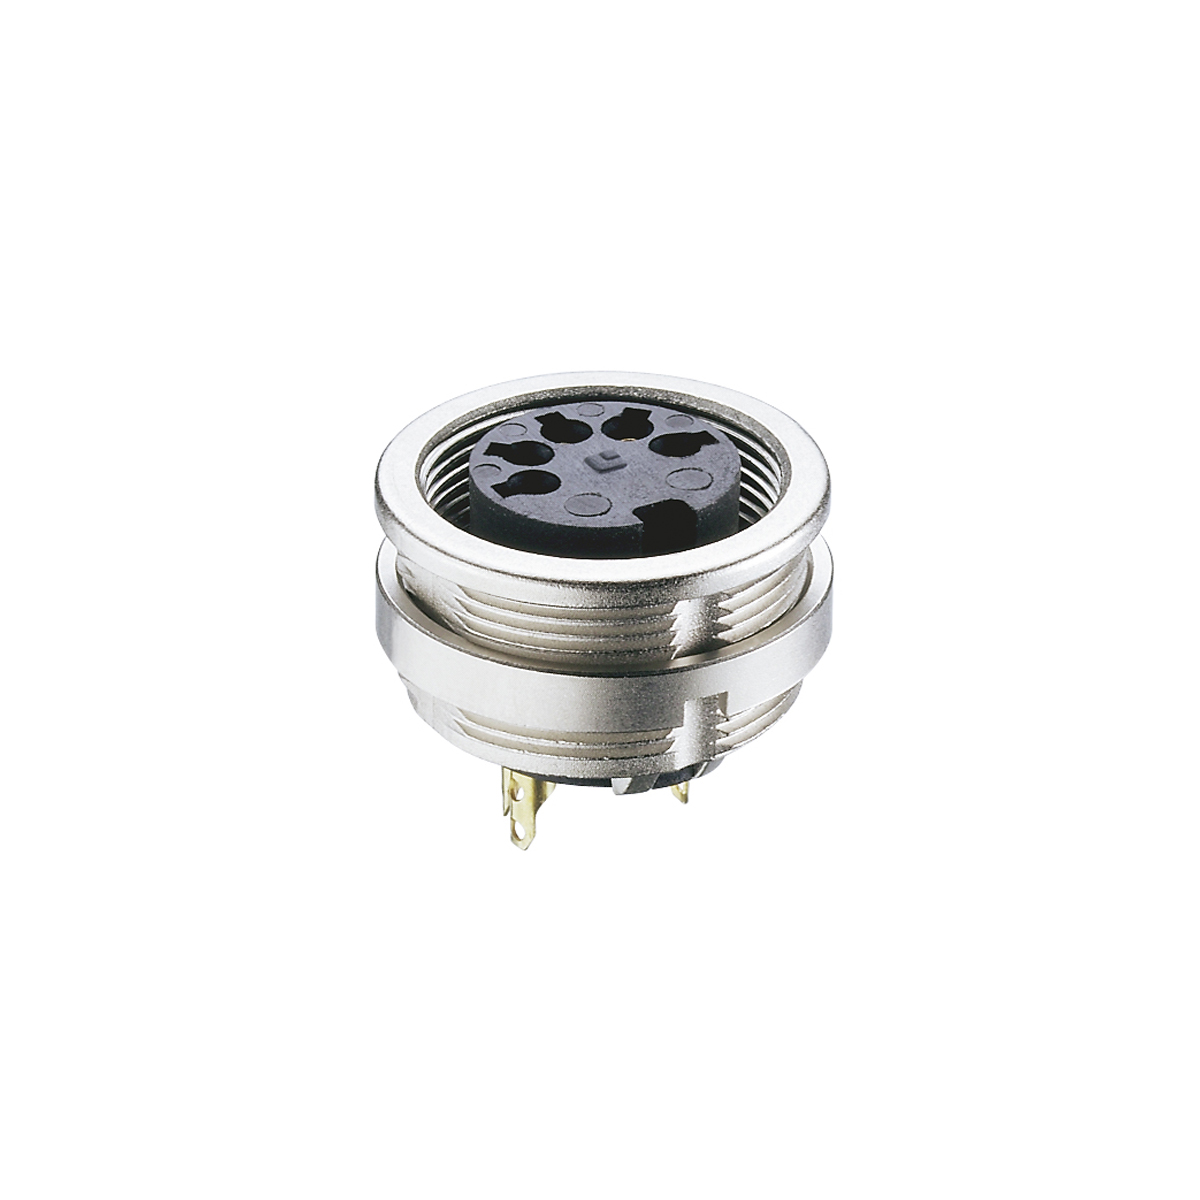 Lumberg: 304 (Series 03 | Circular connectors with threaded joint M16 acc. to IEC 61076-2-106, IP40/IP68)